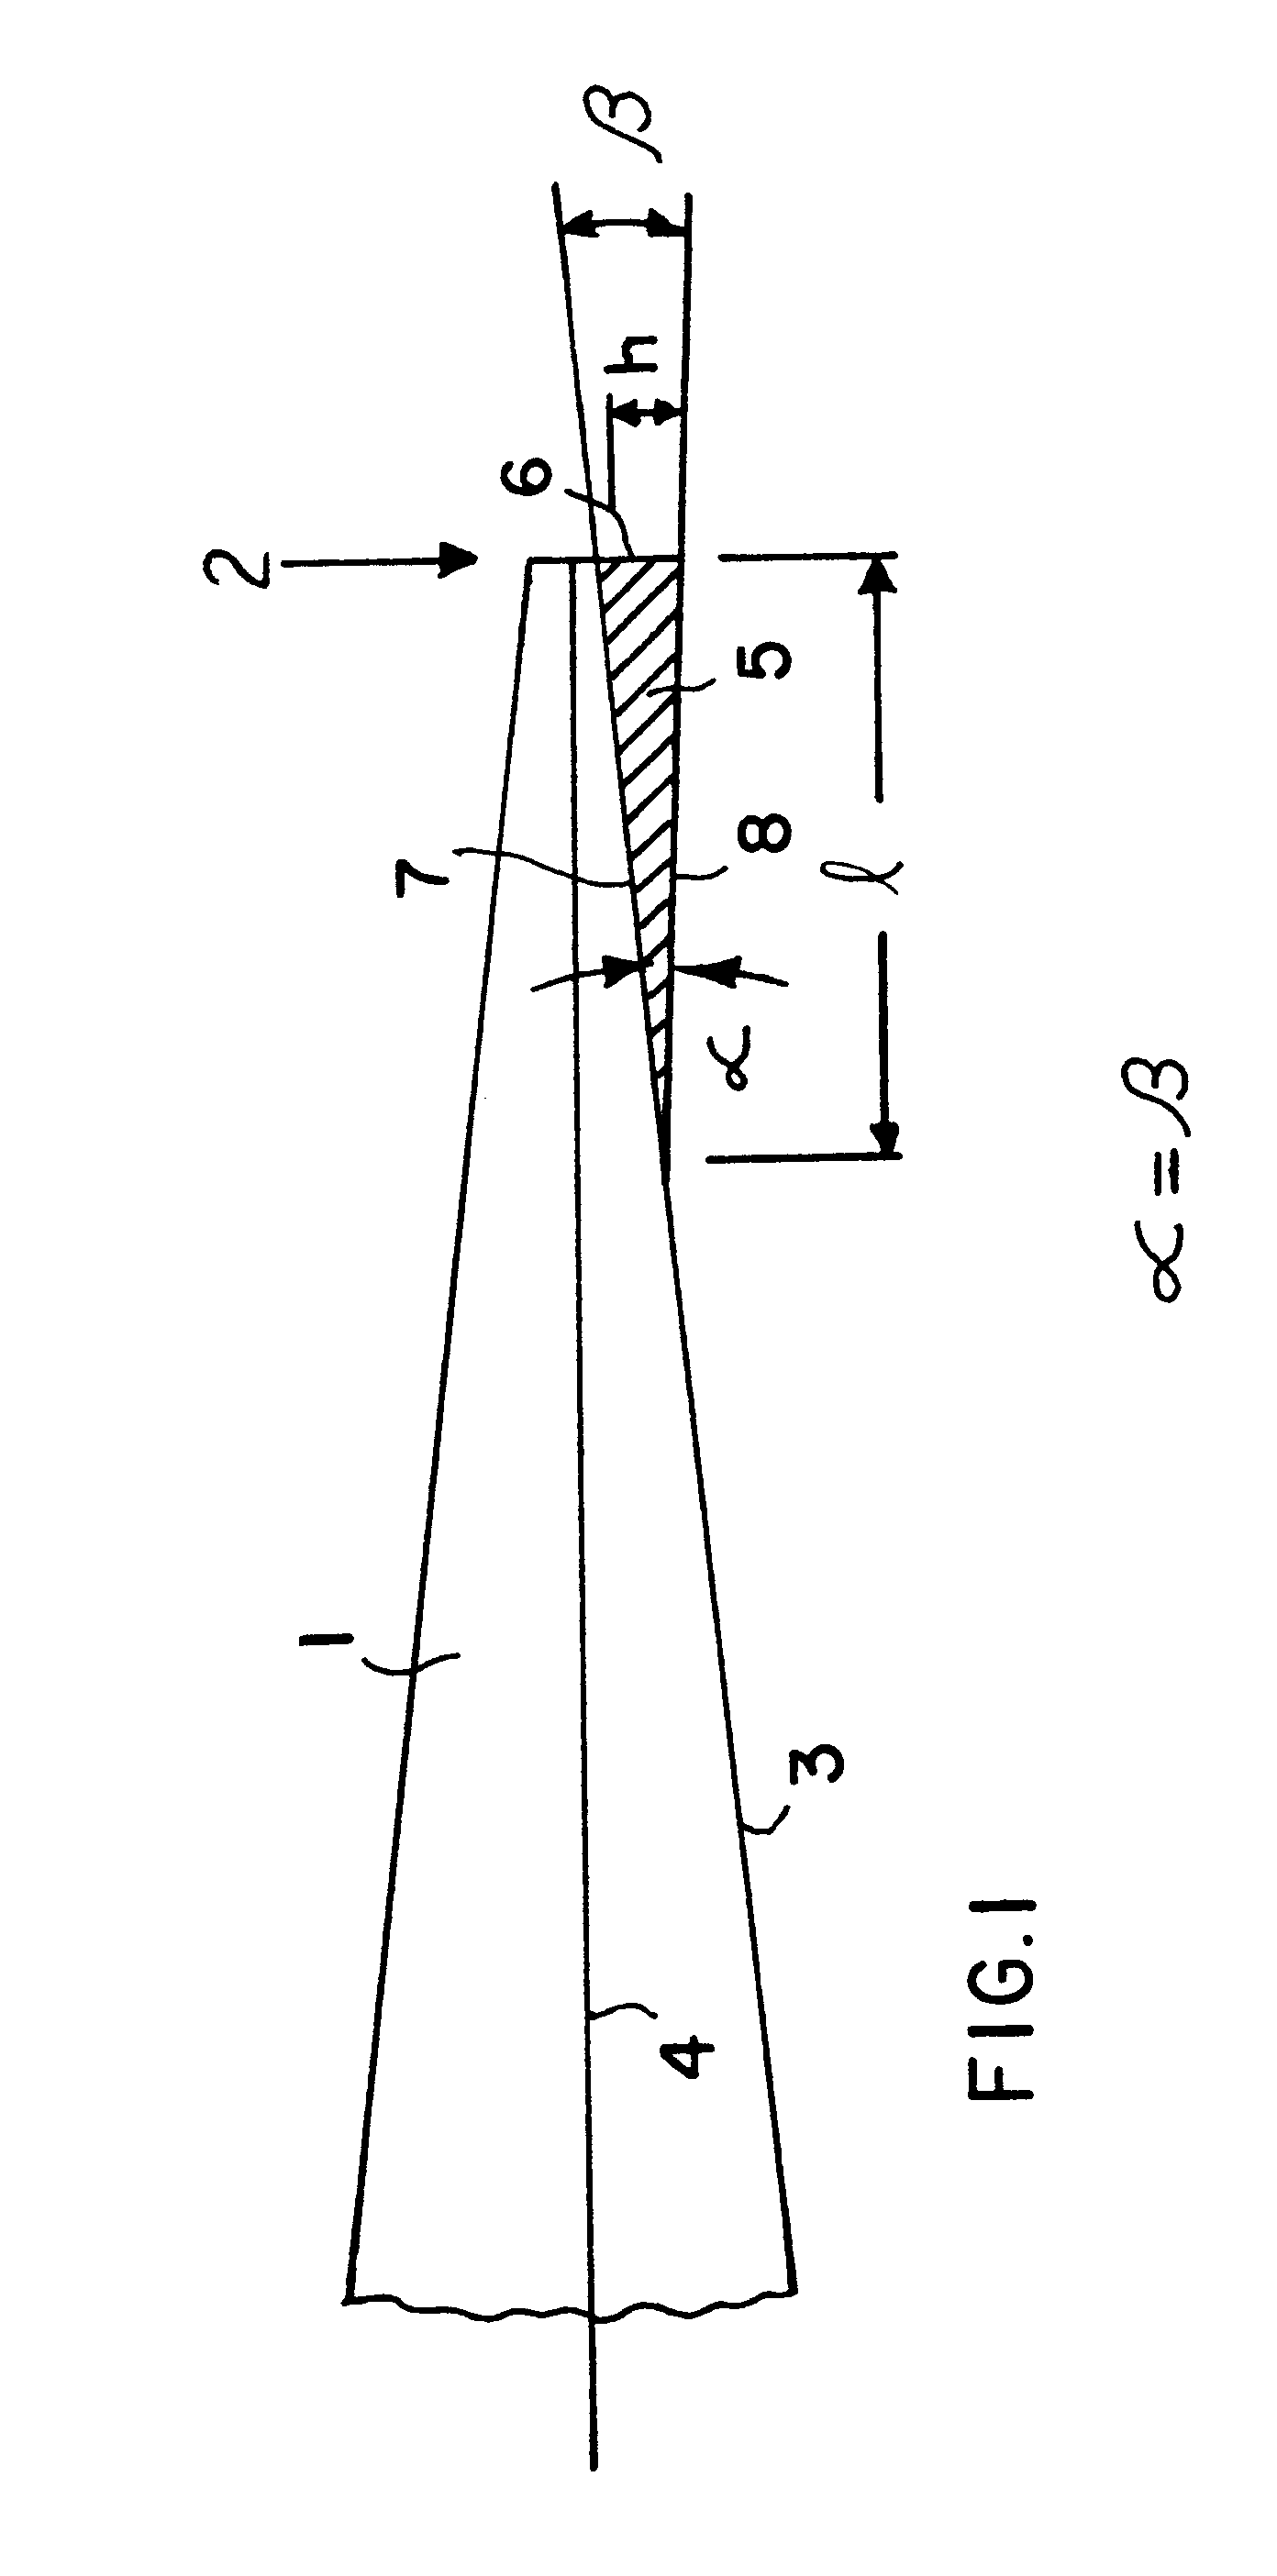 Trailing edge wedge for an aircraft wing